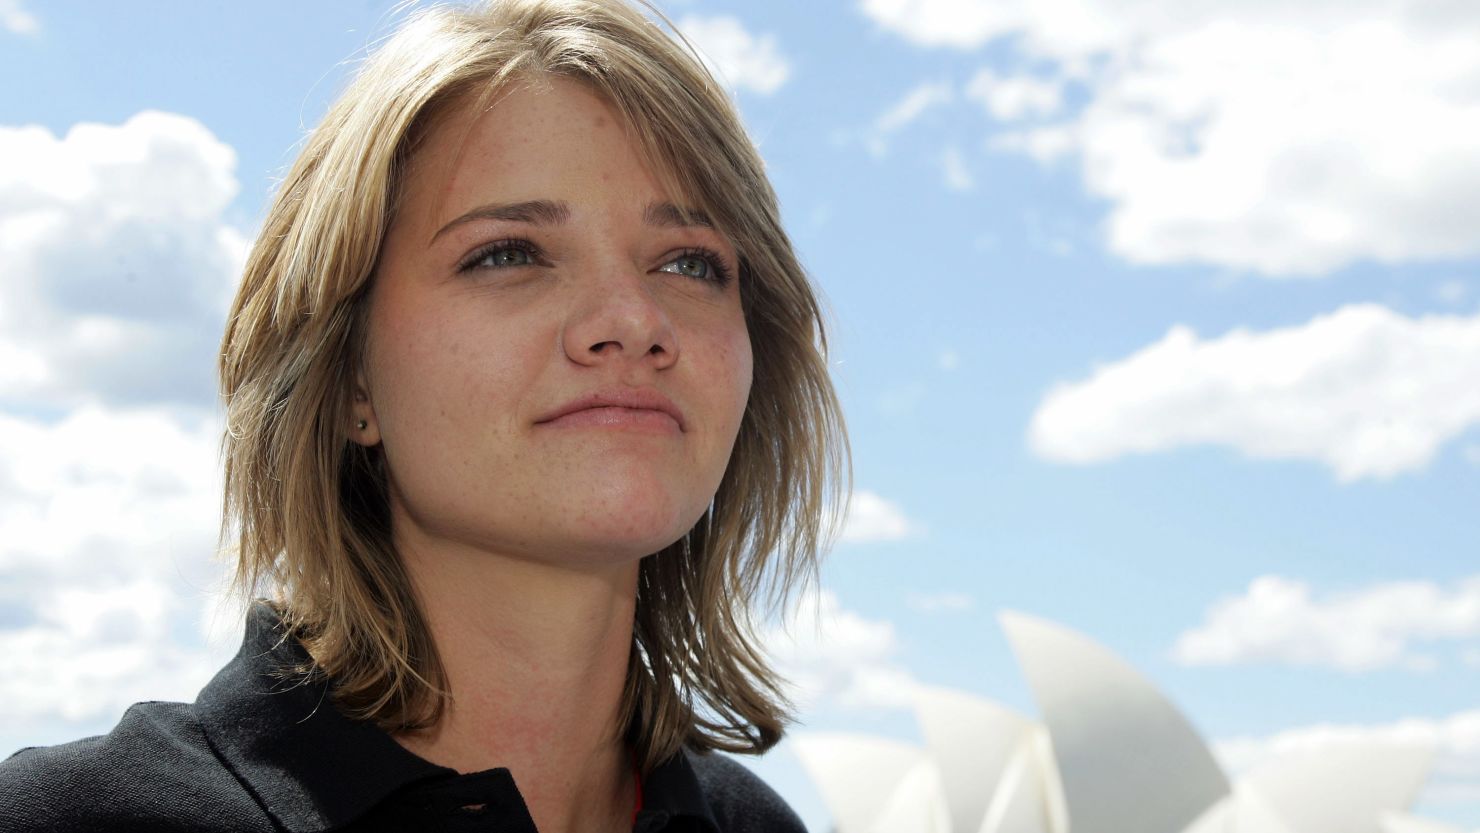 Jessica Watson, pictured here before her round-the-world voyage, will skipper in the 2011 Rolex Sydney to Hobart.